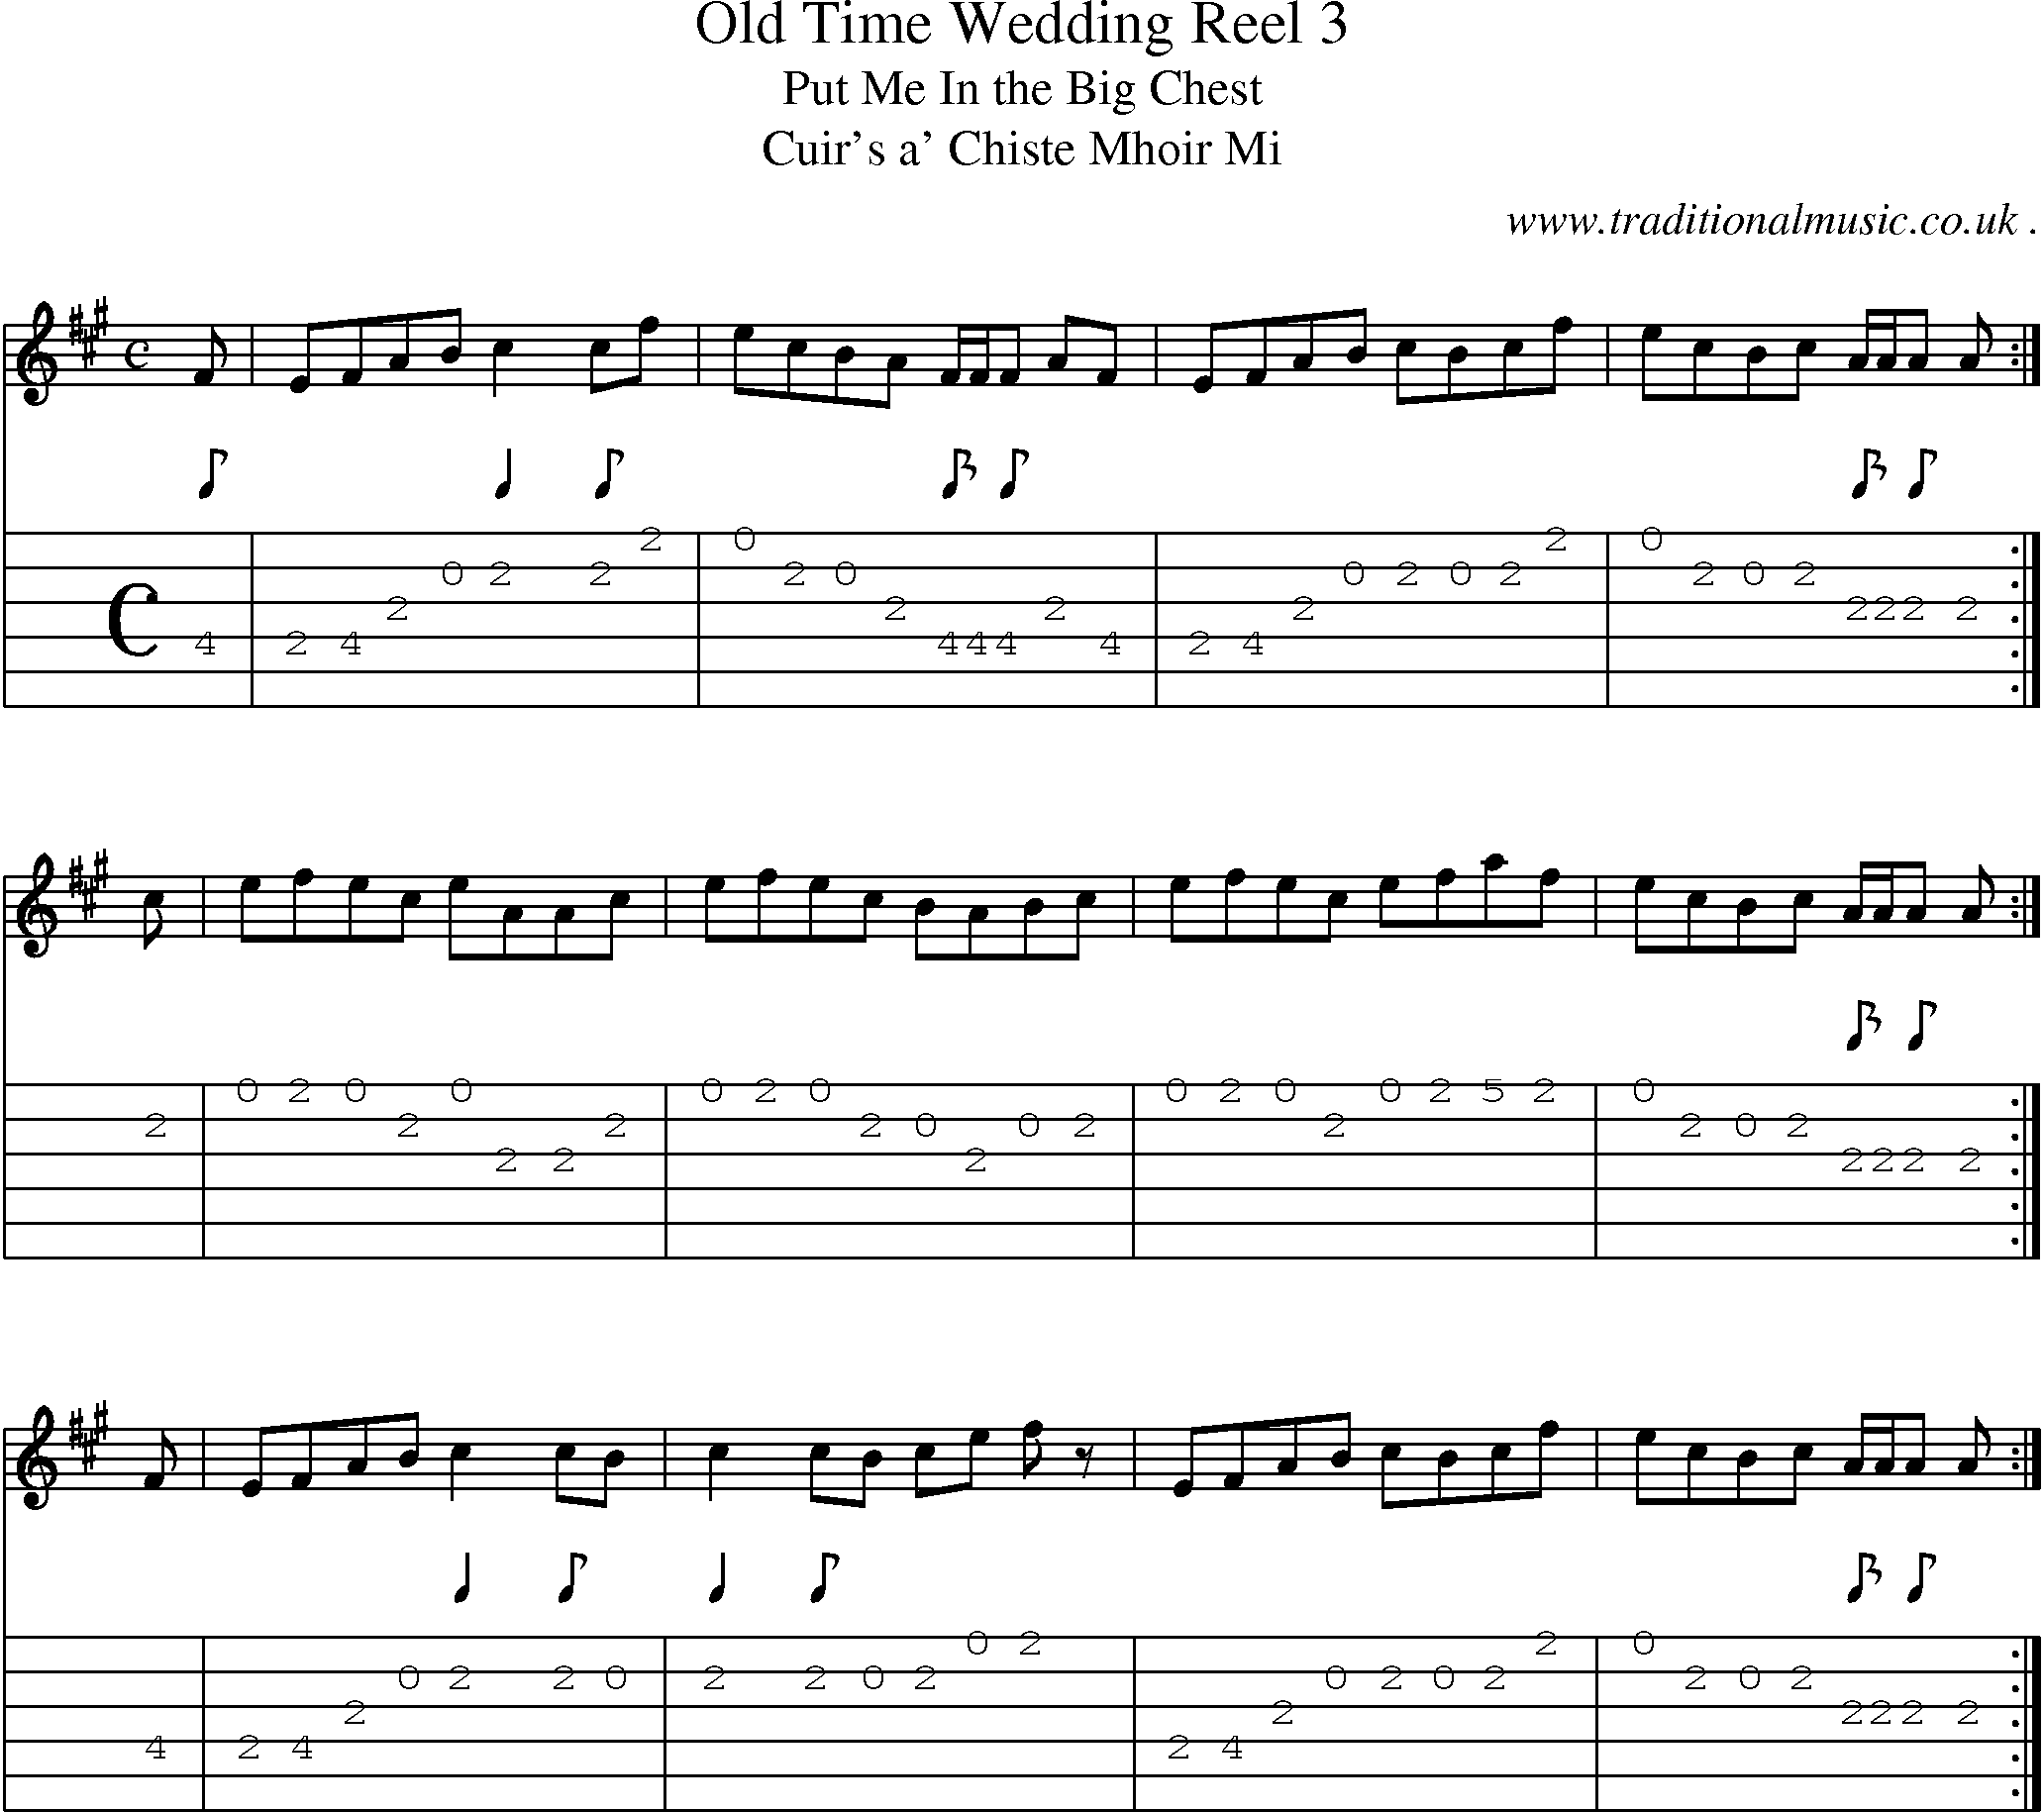 Music Score and Guitar Tabs for Old Time Wedding Reel 3